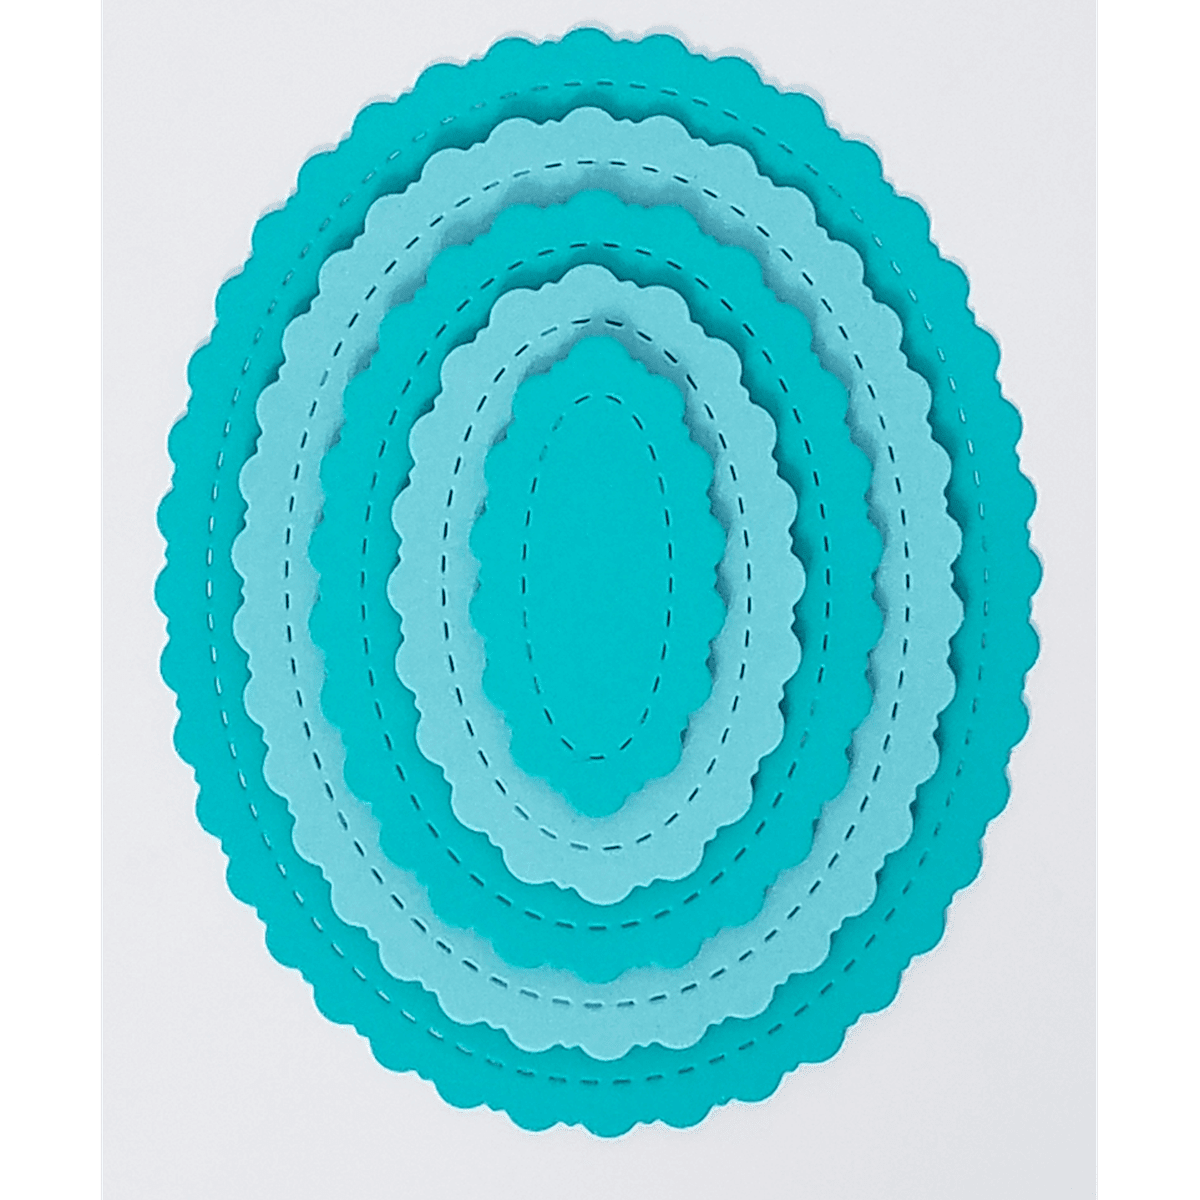 Stitched Fancy Scalloped Oval Dies by Kat Scrappiness - Kat Scrappiness